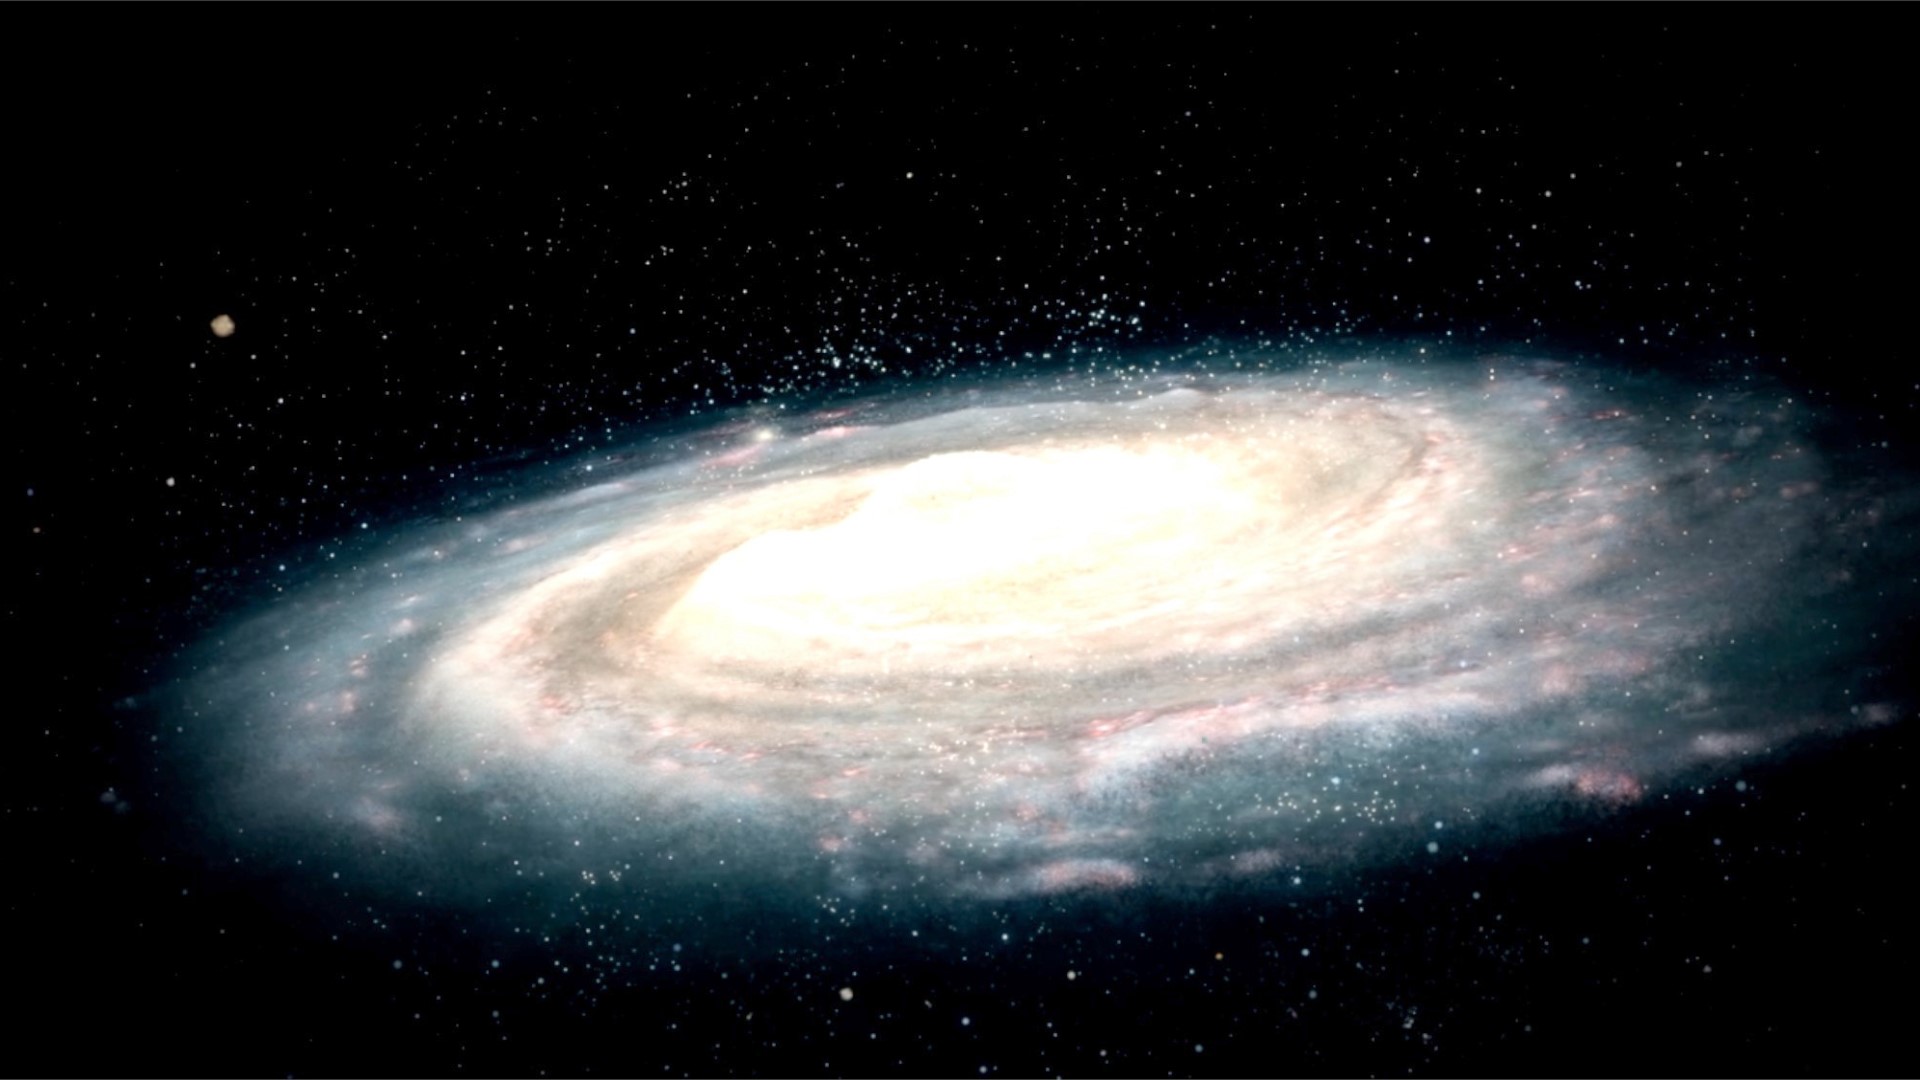 We may finally have an idea of where the whole galaxy started.